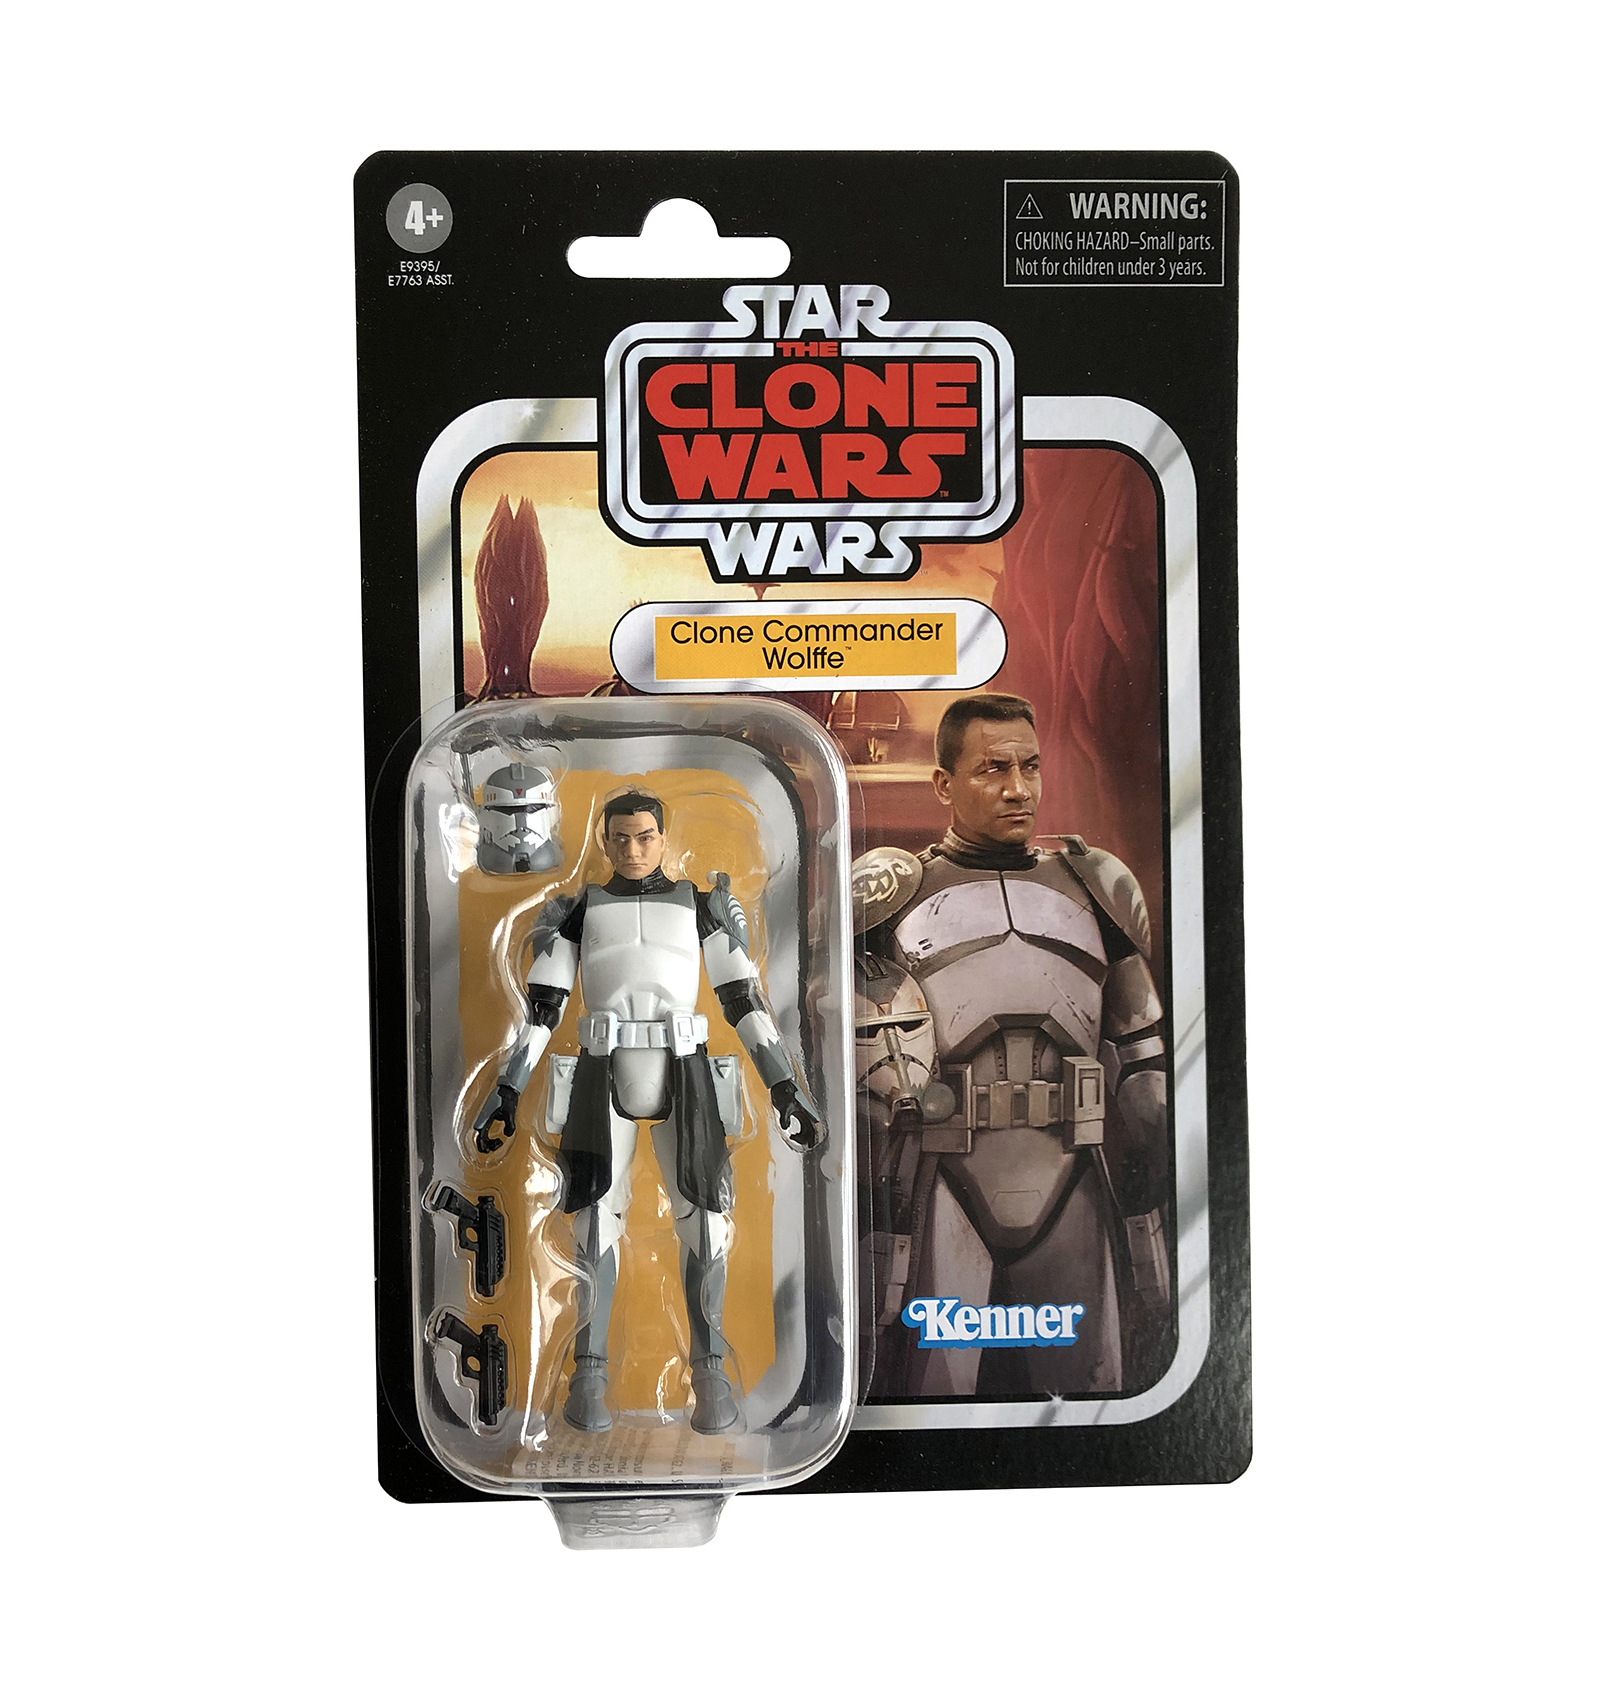 Clone Trooper Commander Wolffe VC168 Star Wars Vintage Collection Clone Wars